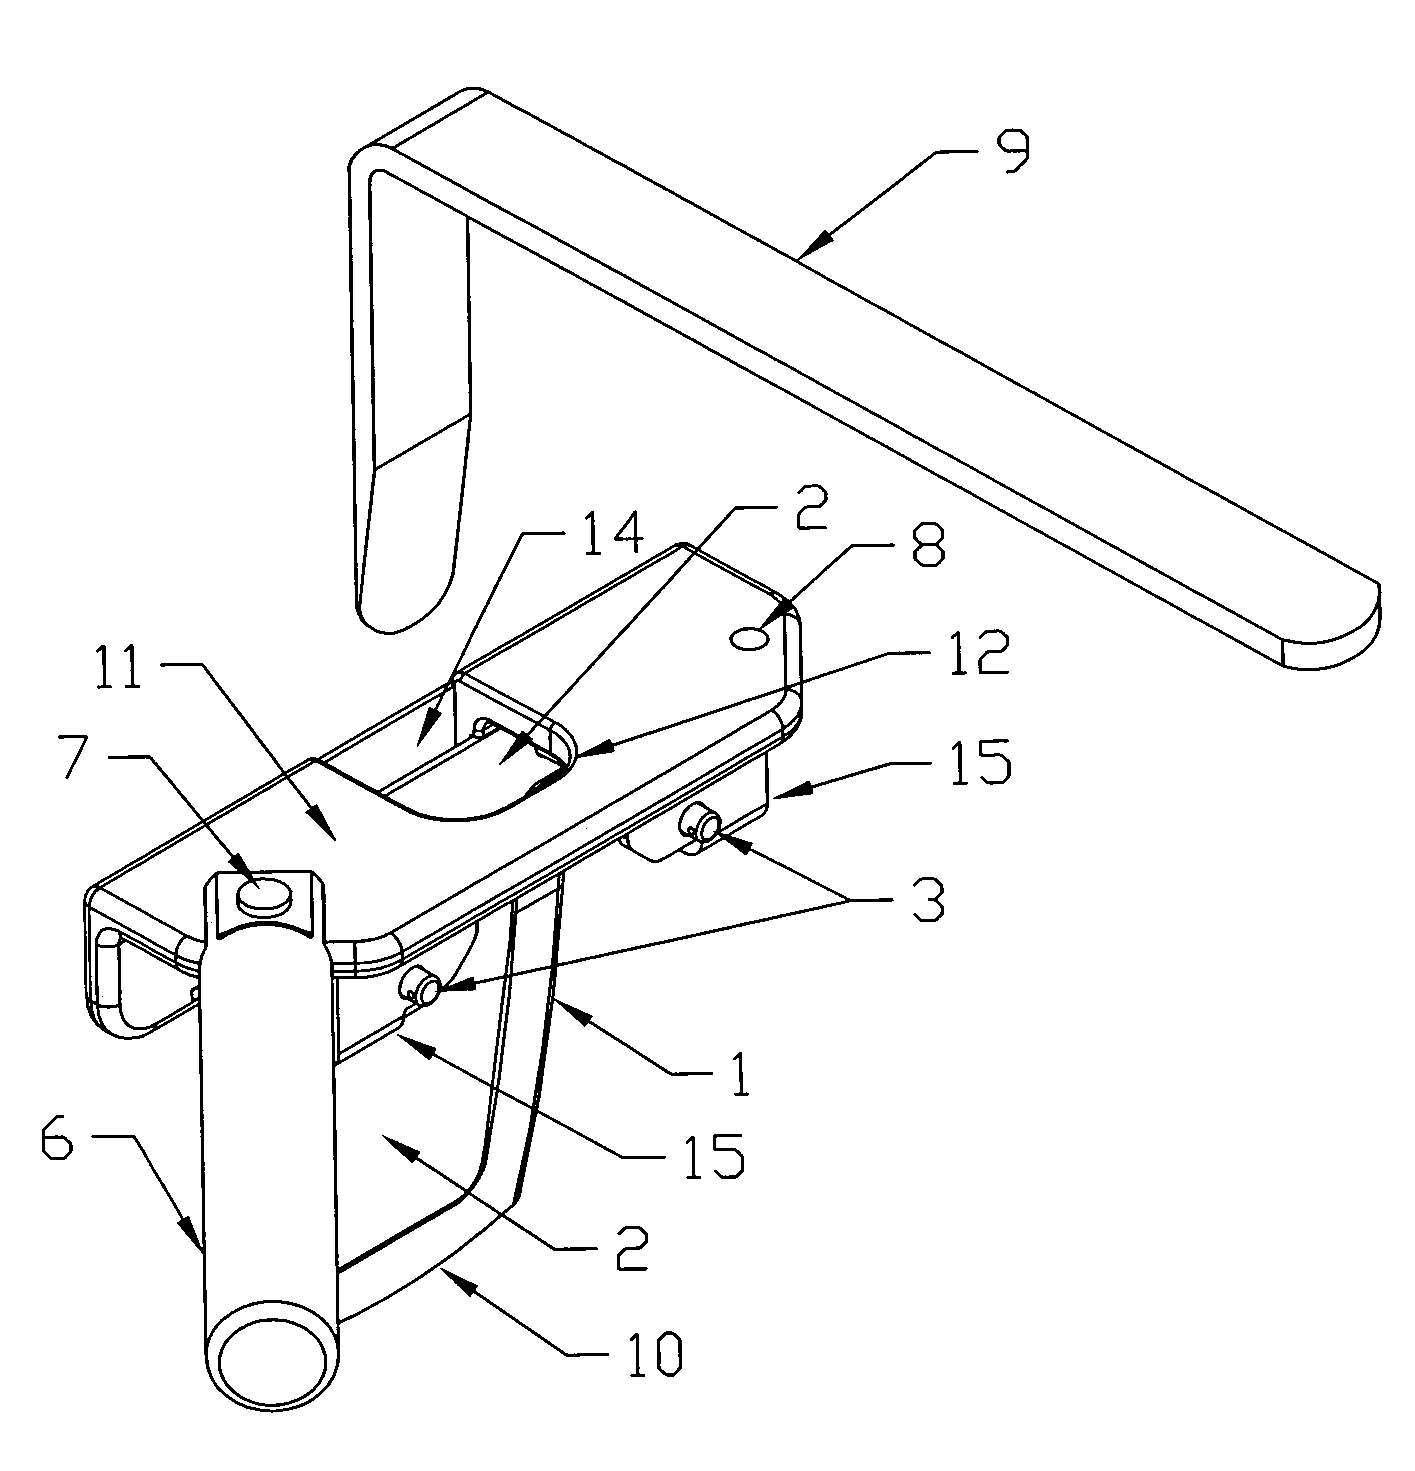 Woodwork removal device